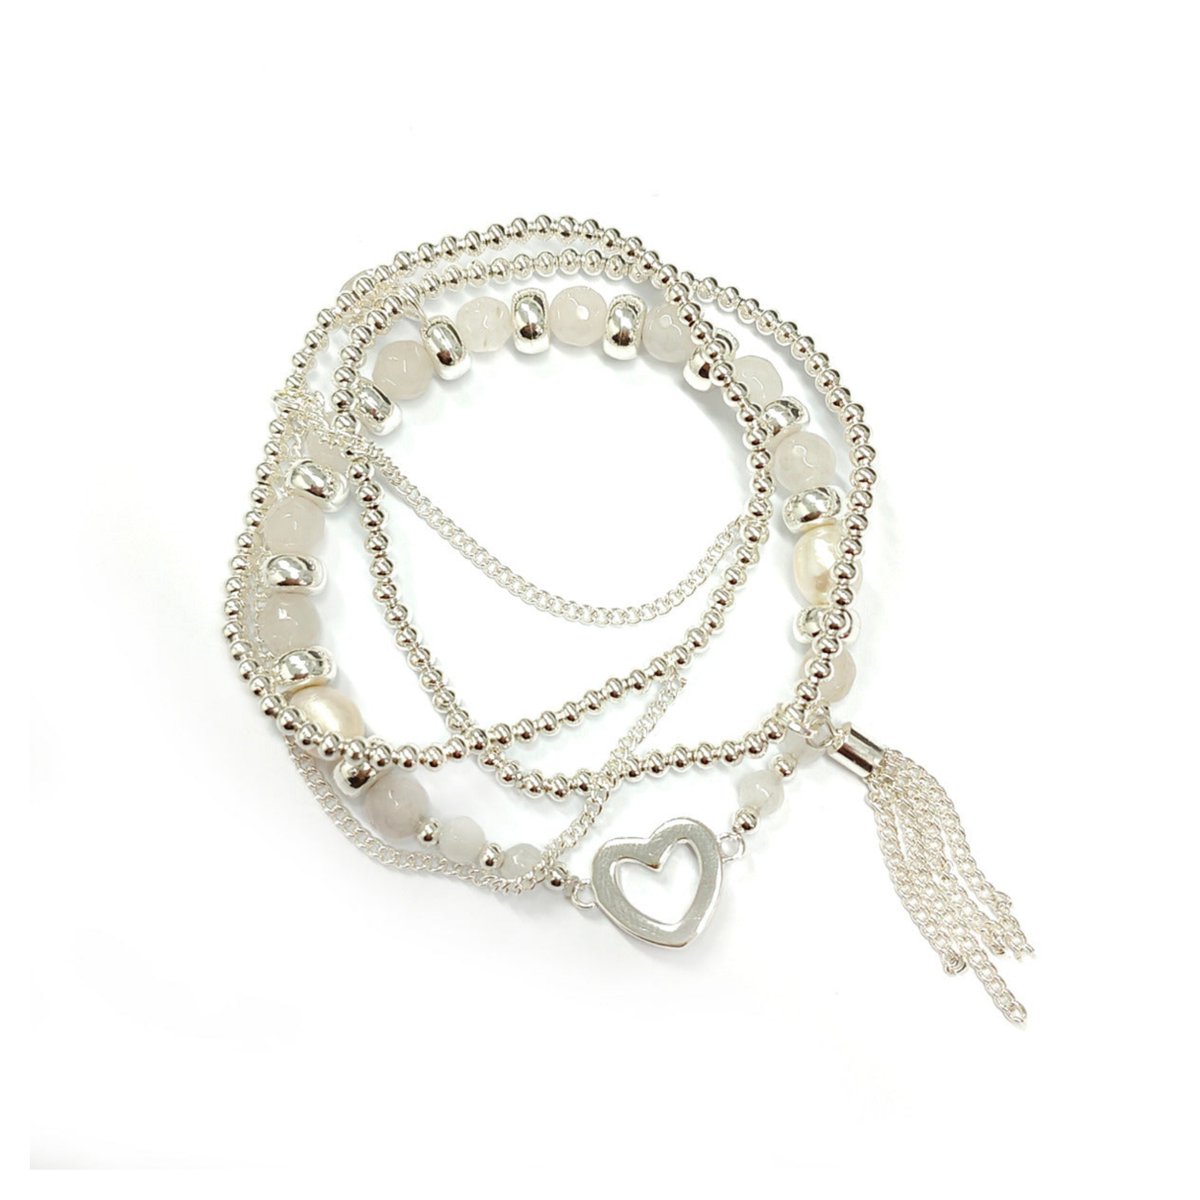 Our Pearl Beads Bracelets are very popular with ladies who love elegance. They are made with layered beads and various shapes of charms, perfect to match with night dresses. Discover more on our #wholesale website: yokosfashion.com/bracelets
#pearlbracelets#yokosfashion